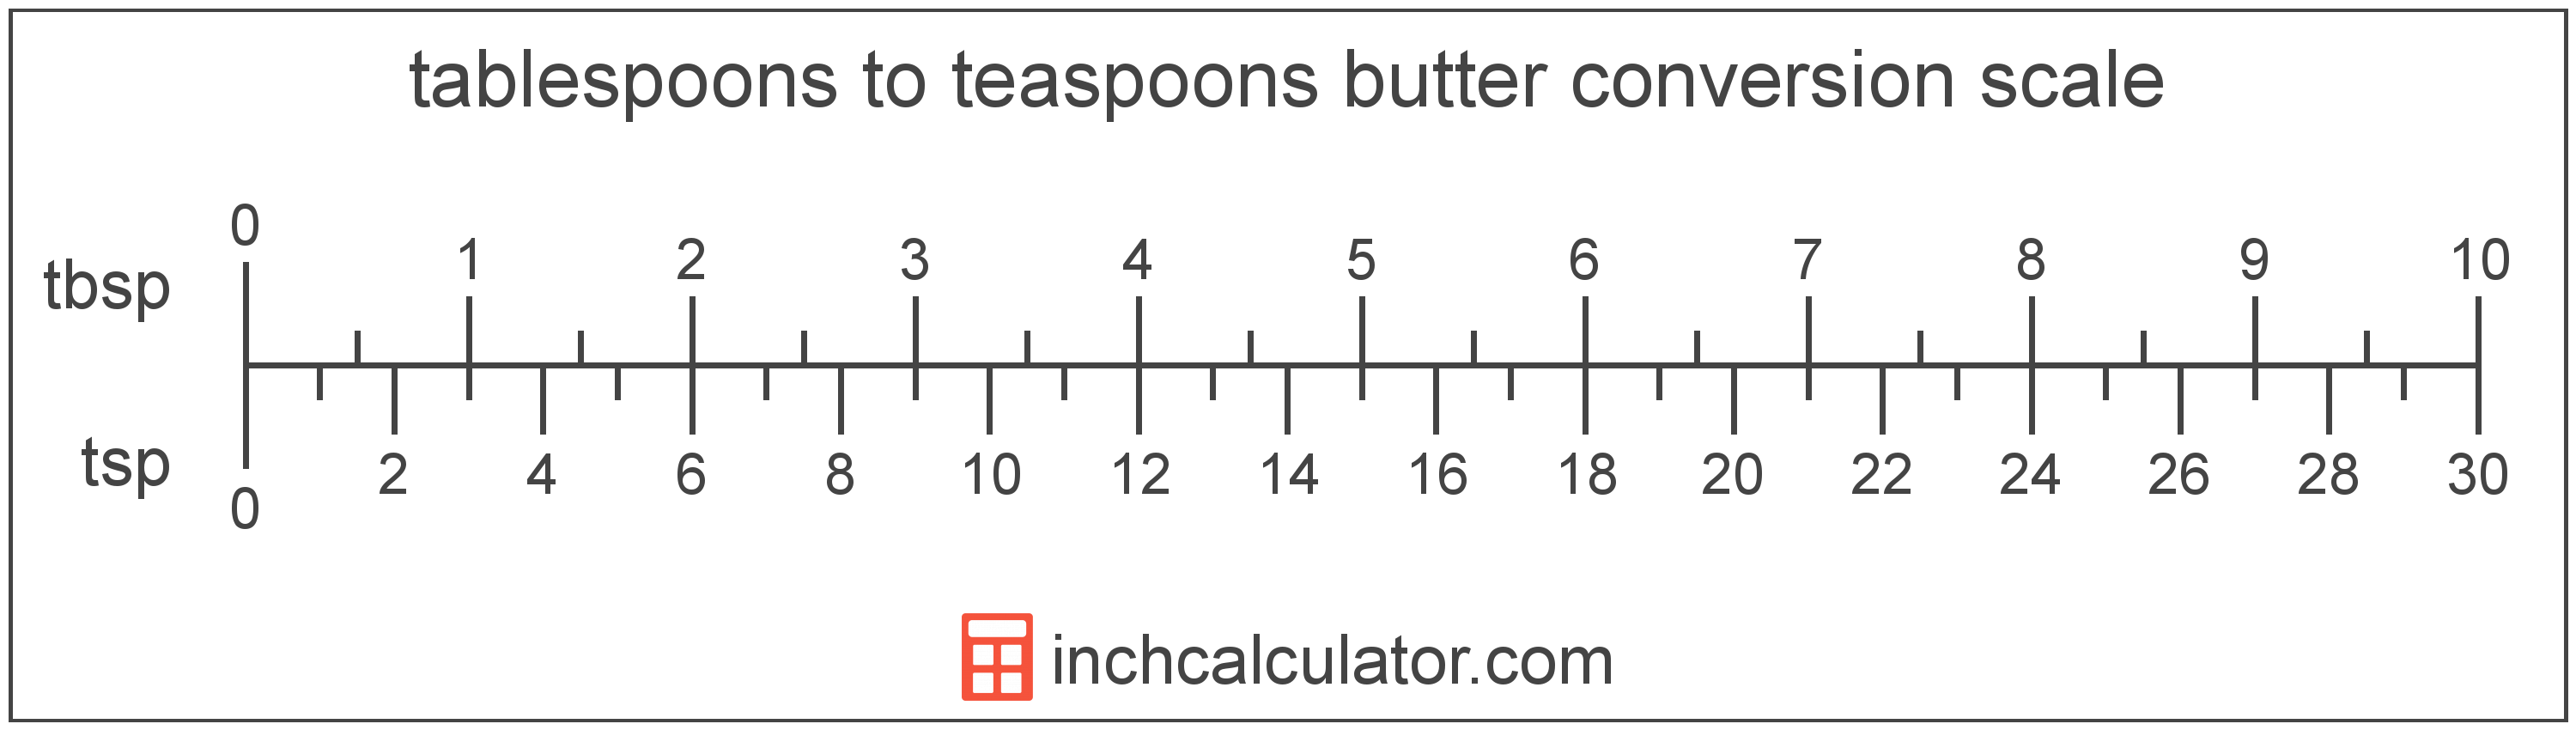 conversion scale showing tablespoons and equivalent teaspoons butter values